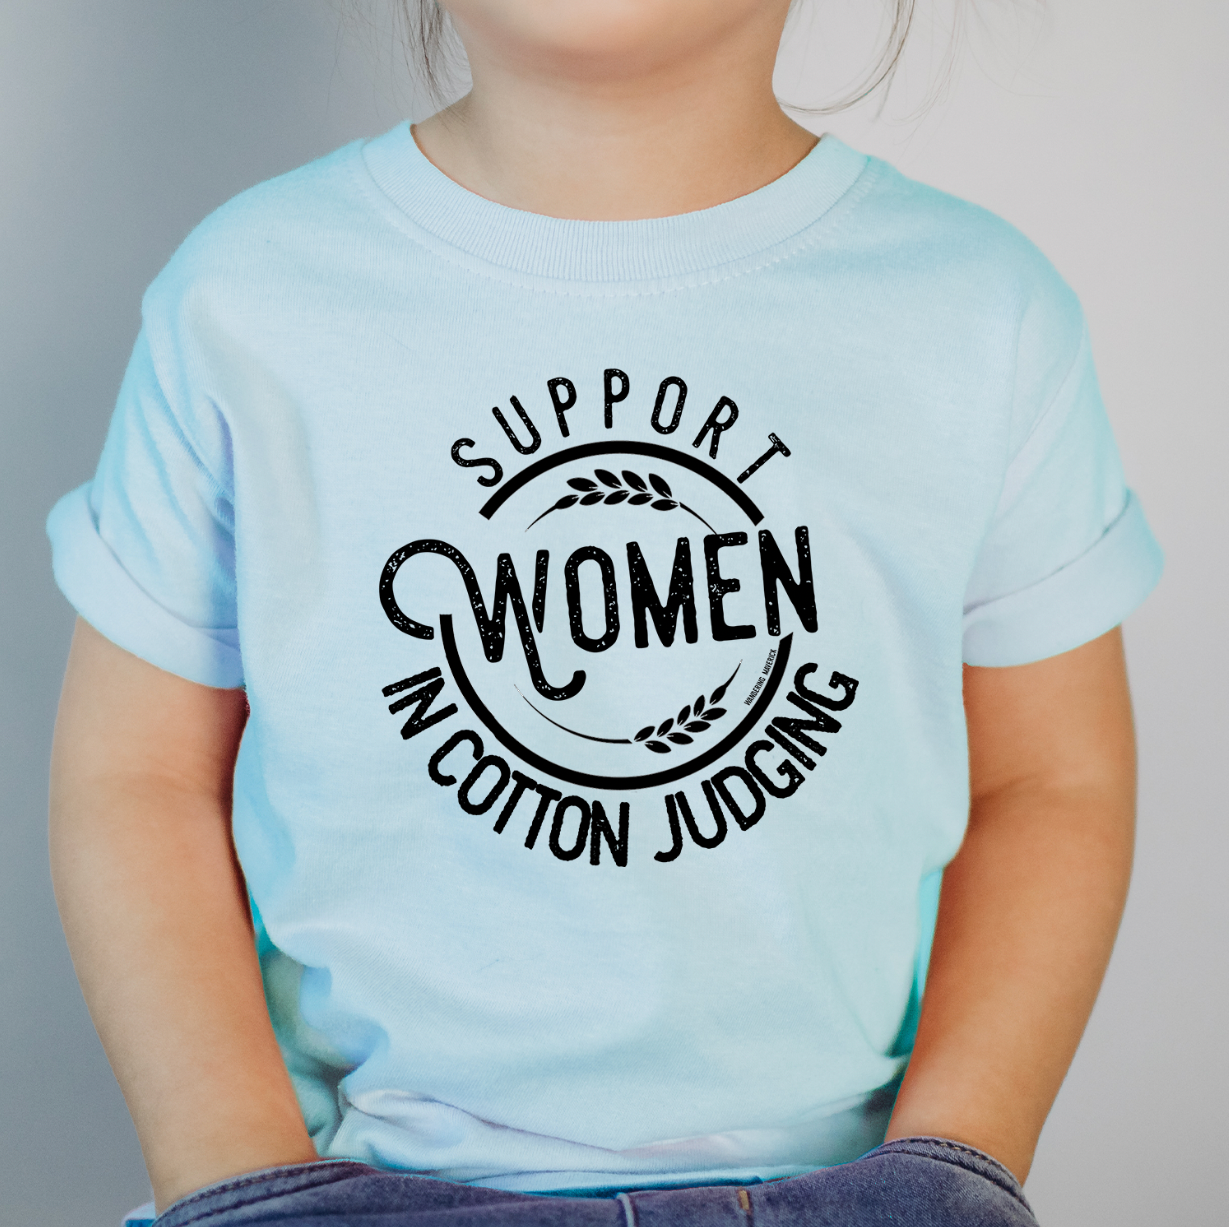 Support Women In Cotton Judging One Piece/T-Shirt (Newborn - Youth XL) - Multiple Colors!